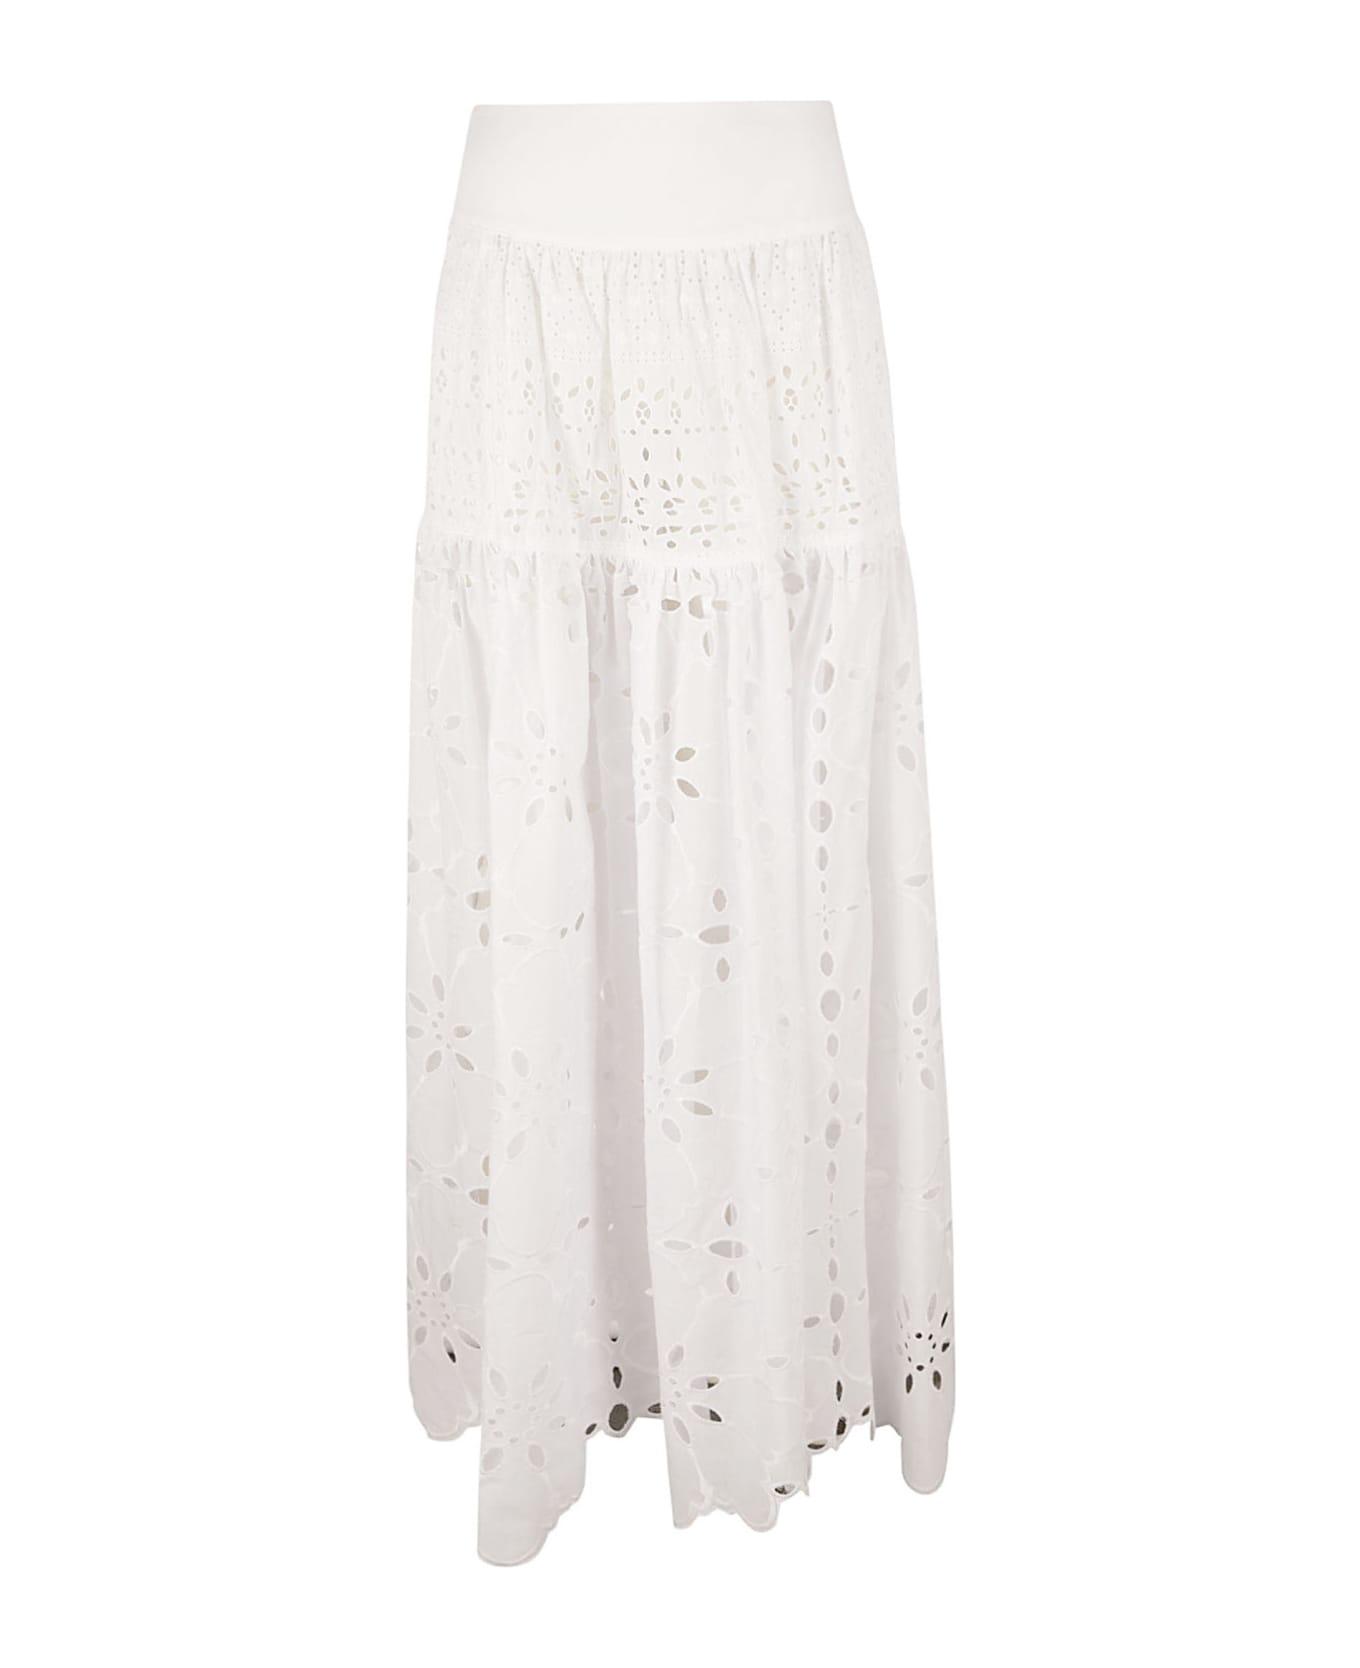 Ermanno Scervino High-waist Floral Perforated Skirt - White スカート